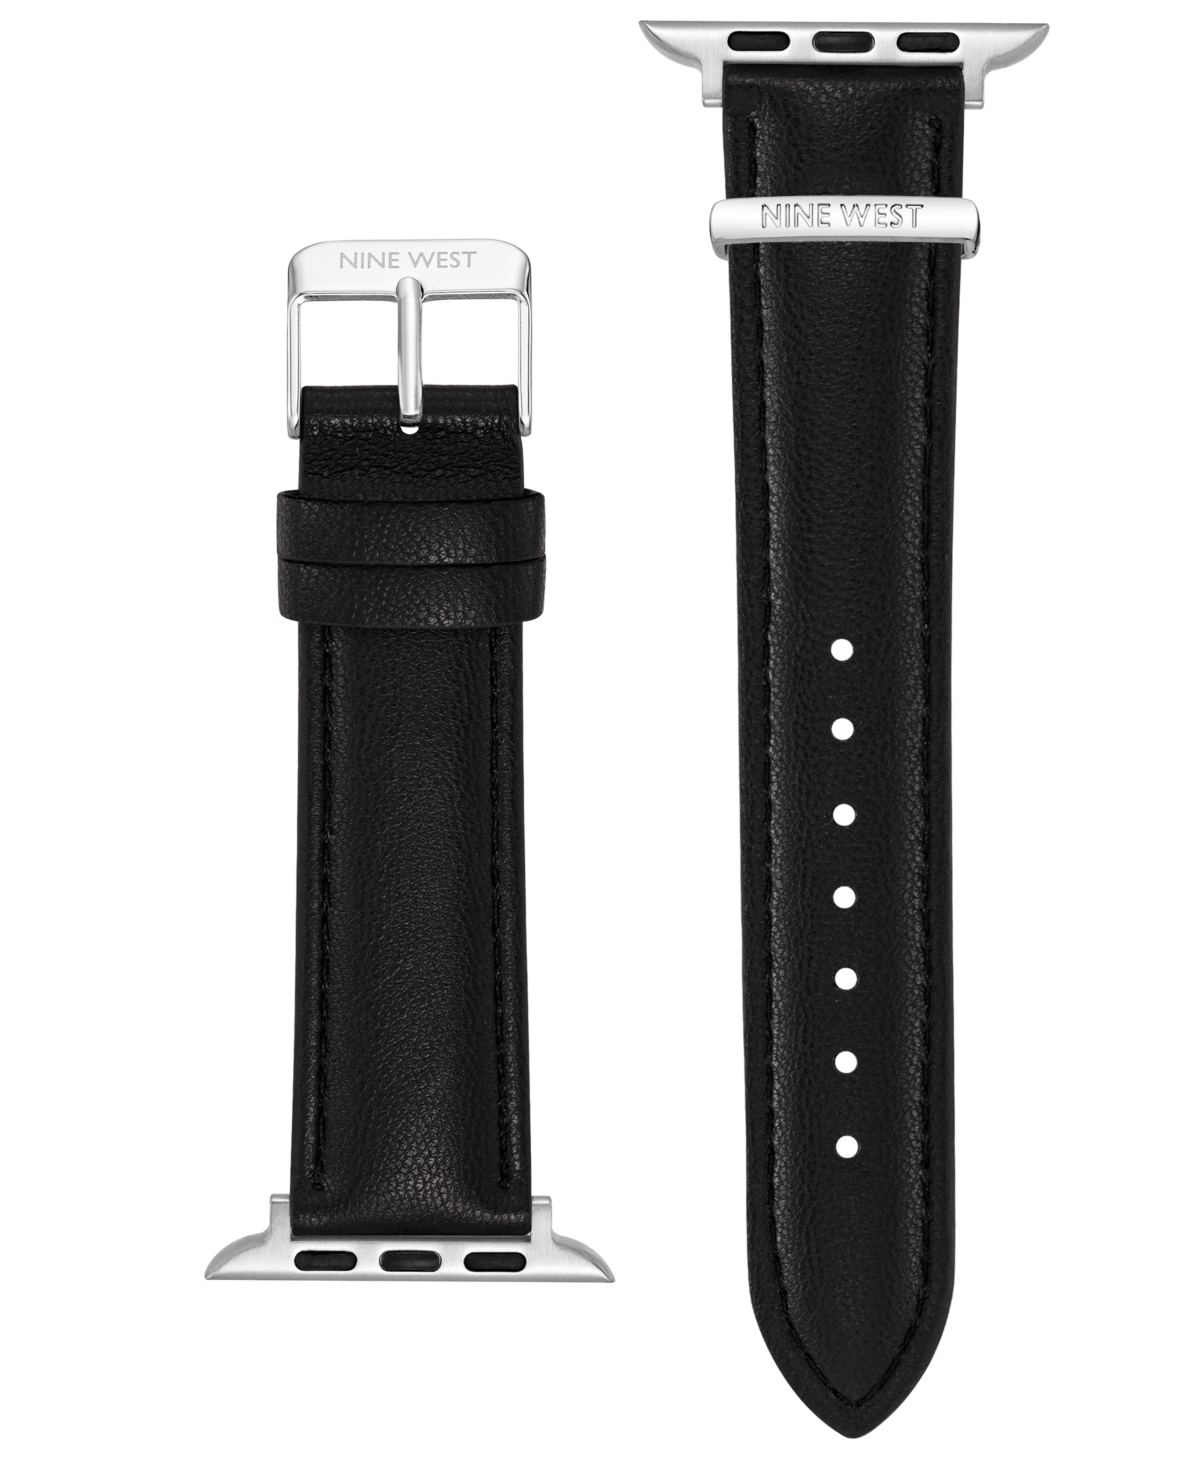 NINE WEST WOMEN'S BLACK SMOOTH FAUX LEATHER STRAP WITH SILVER-TONE STAINLESS STEEL ADAPTORS COMPATIBLE WITH 42